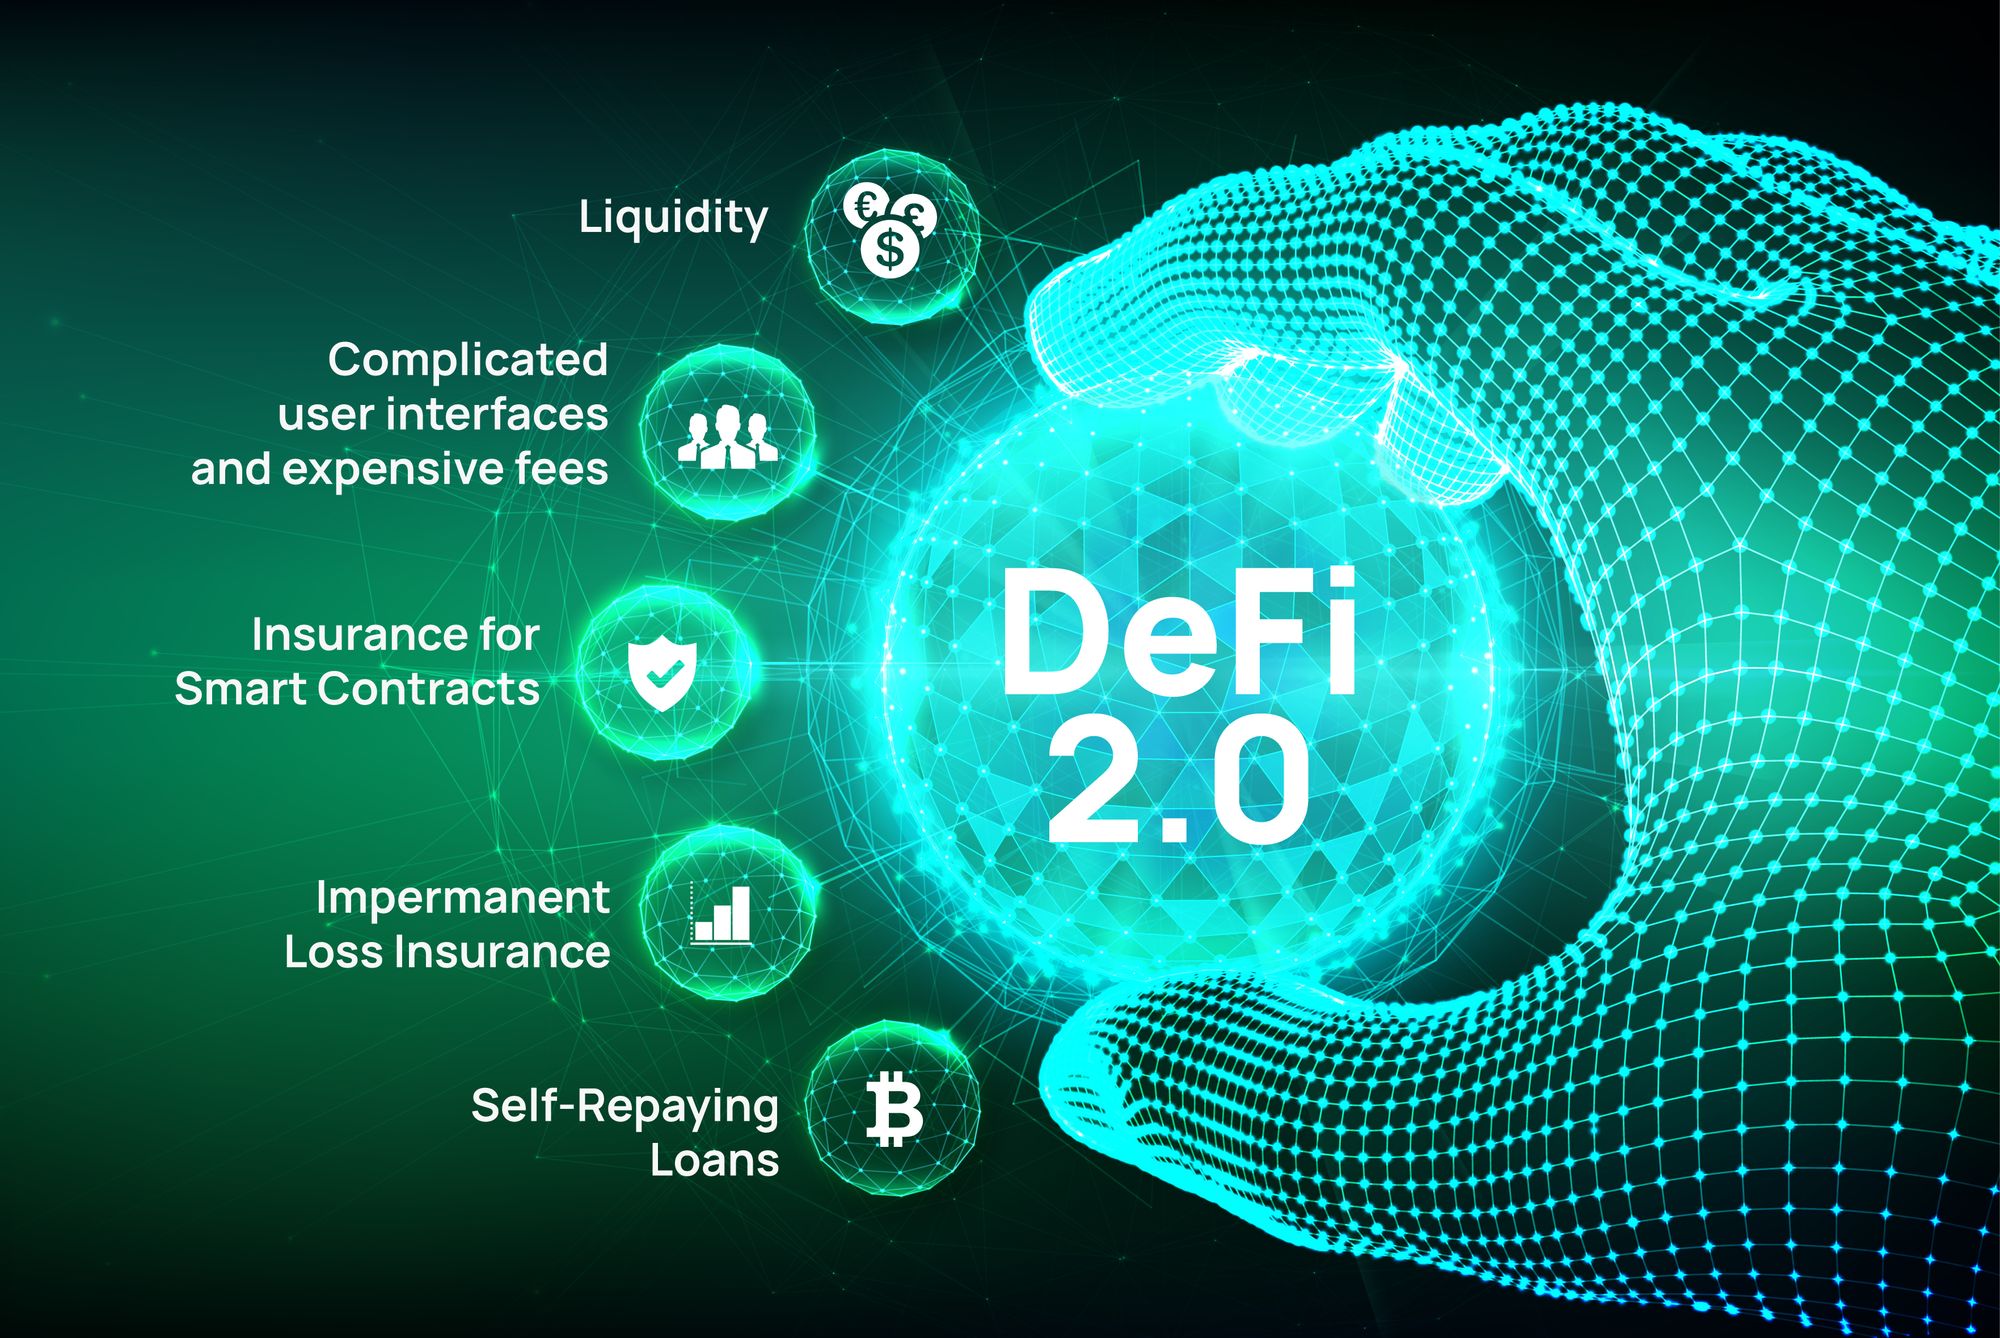 What are the issues with DeFi 1.0? And what’s being done to make it better?